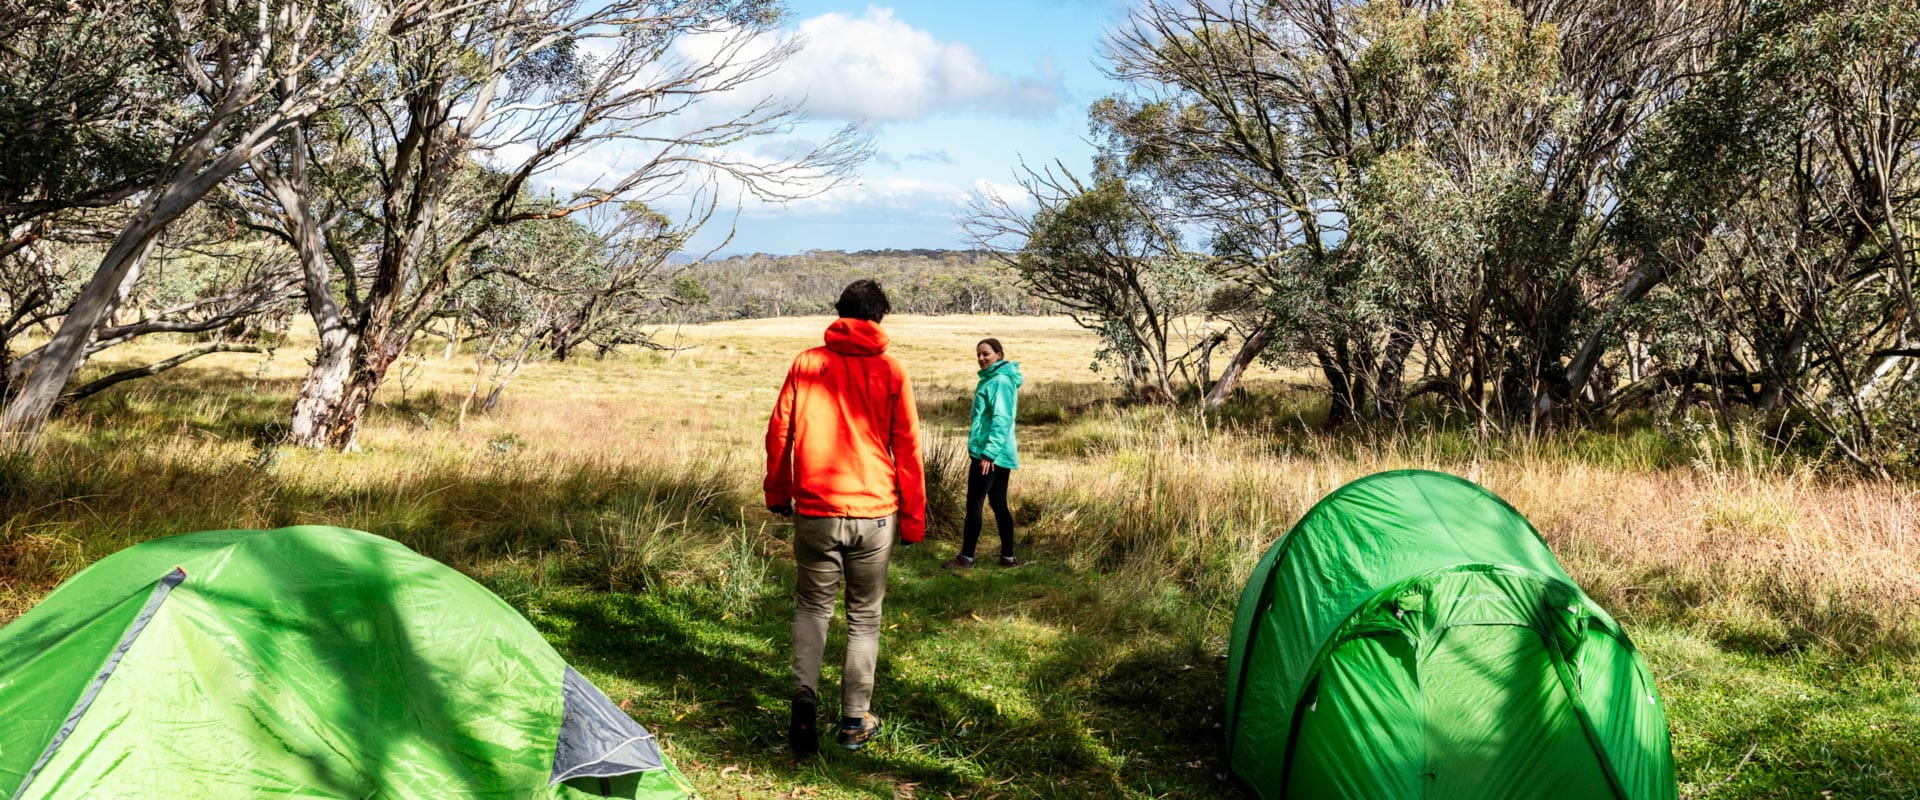 A man and woman standing with their camping tents  overlooking an open, grassy field with a dense tree line in the distance.